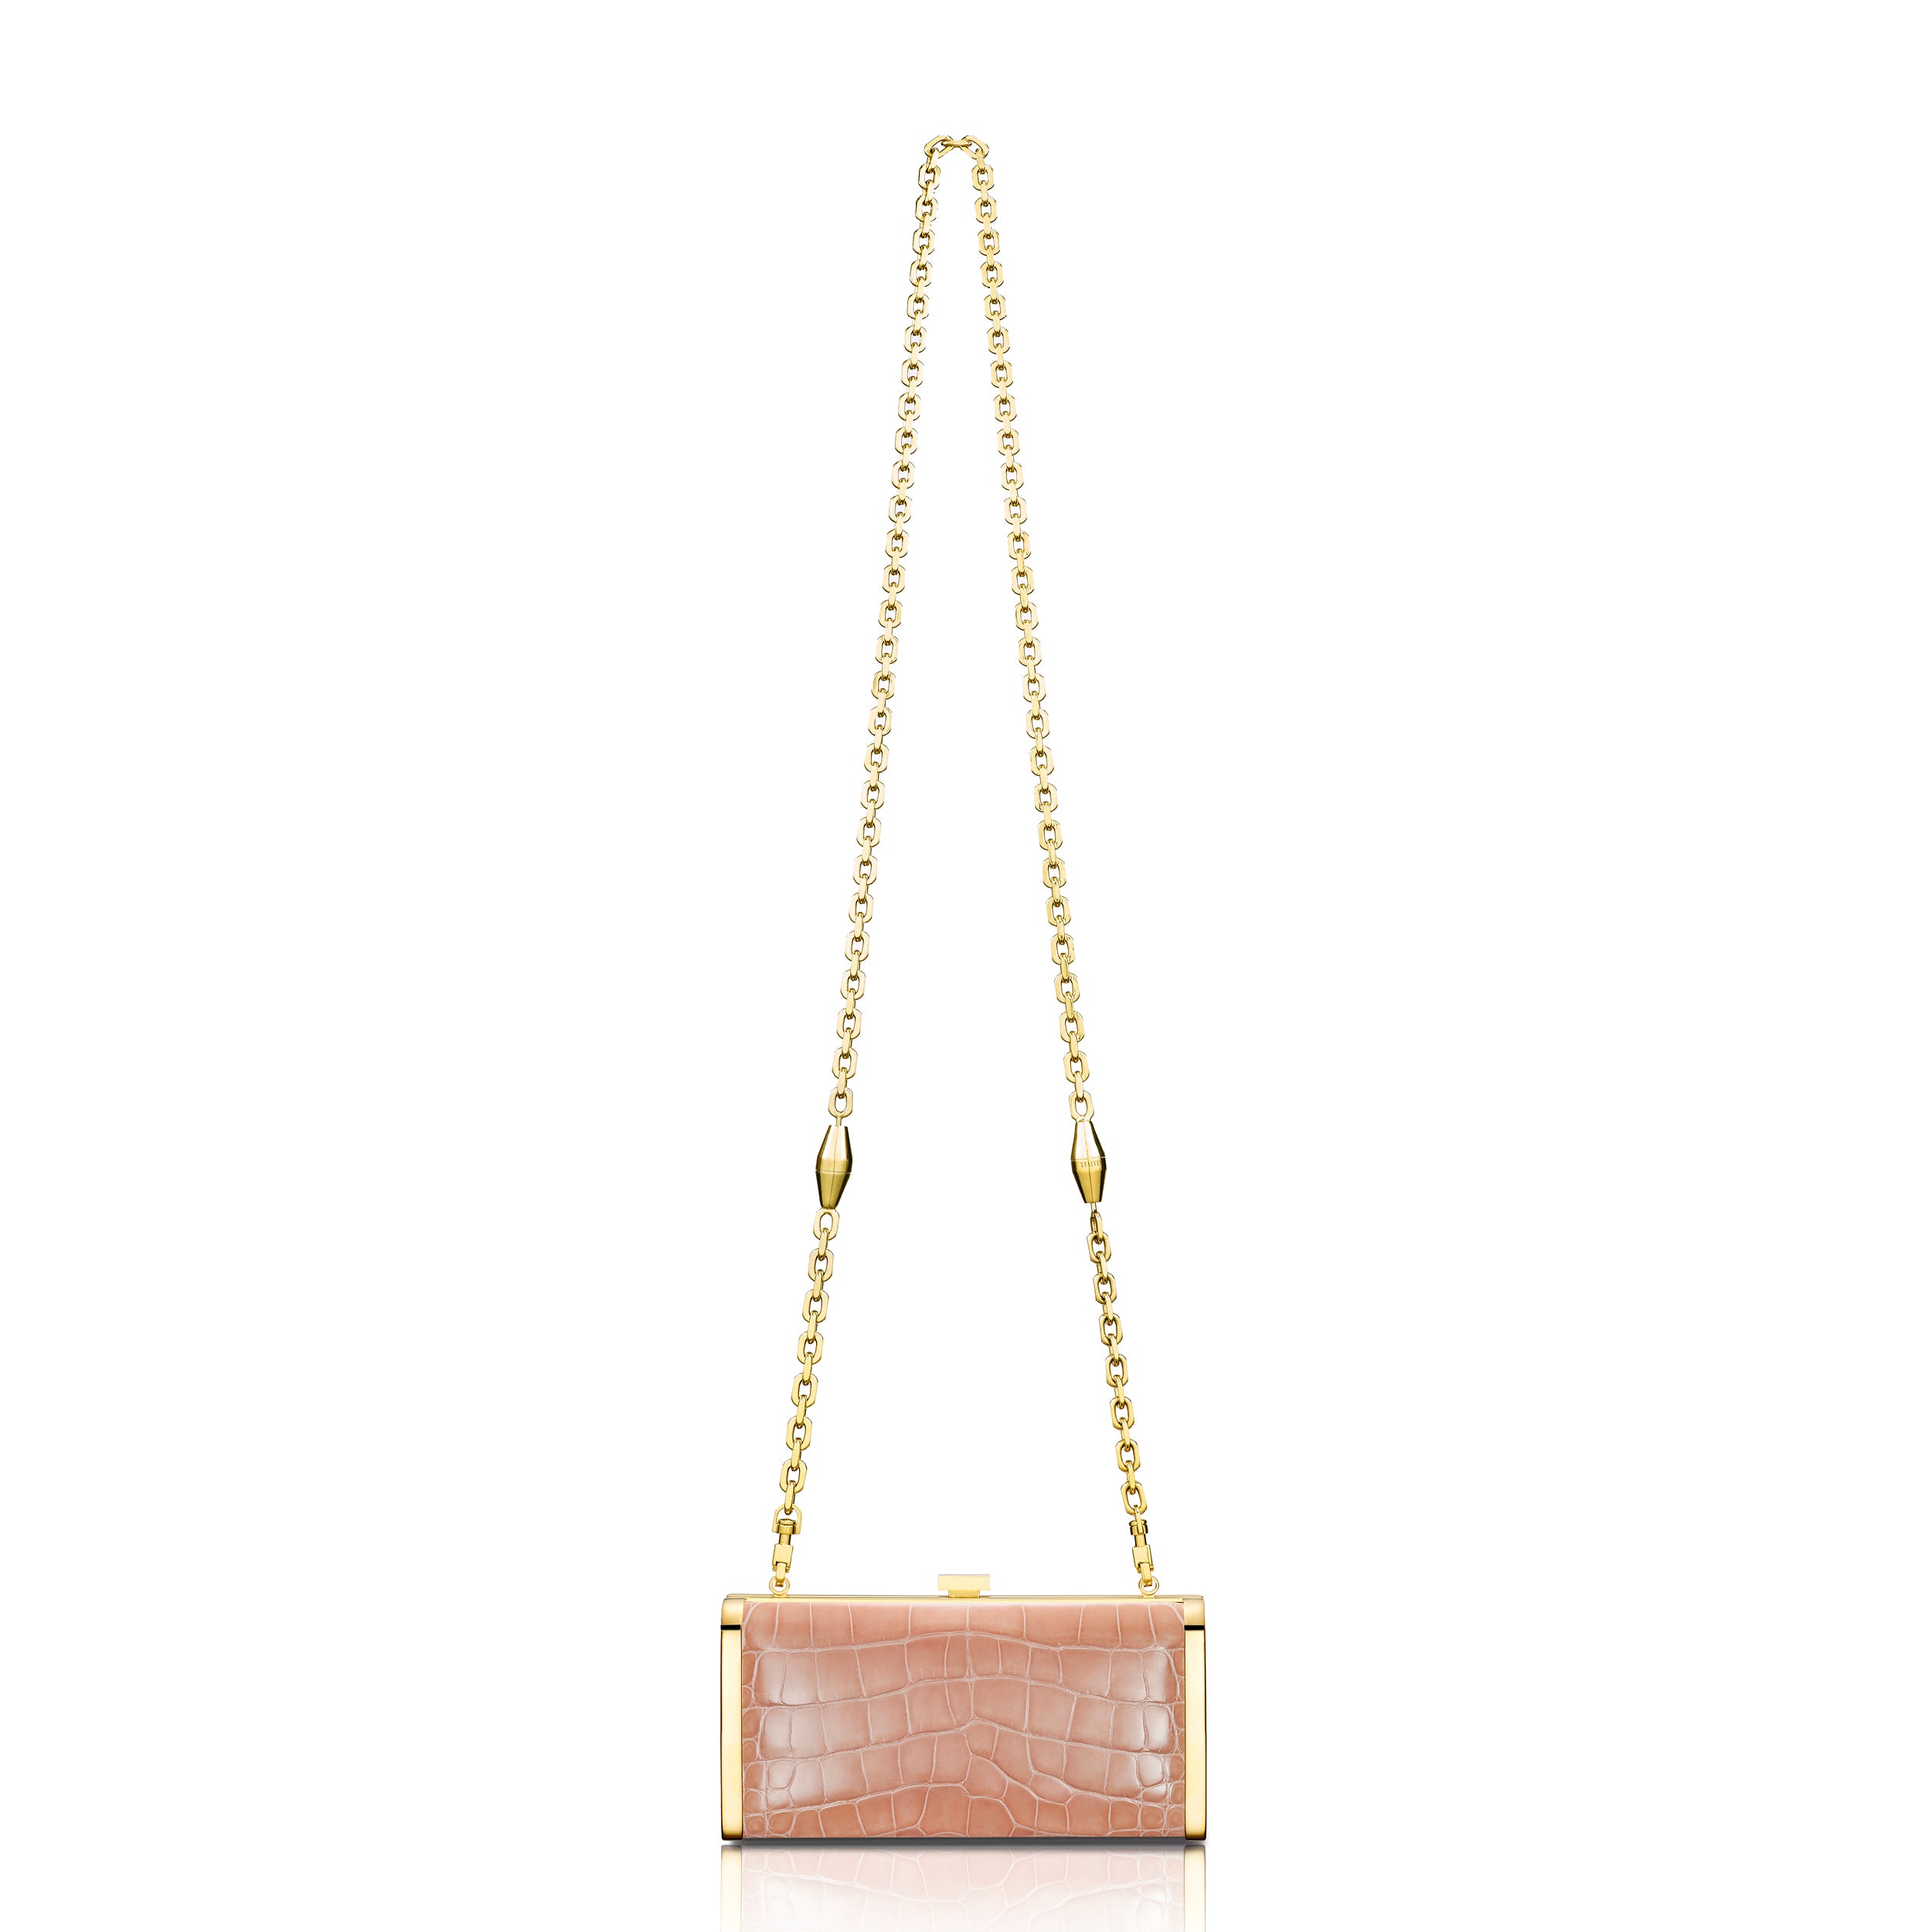 STALVEY Square Clutch in Powder Pink Alligator with 24kt Gold Hardware Front View with Chain